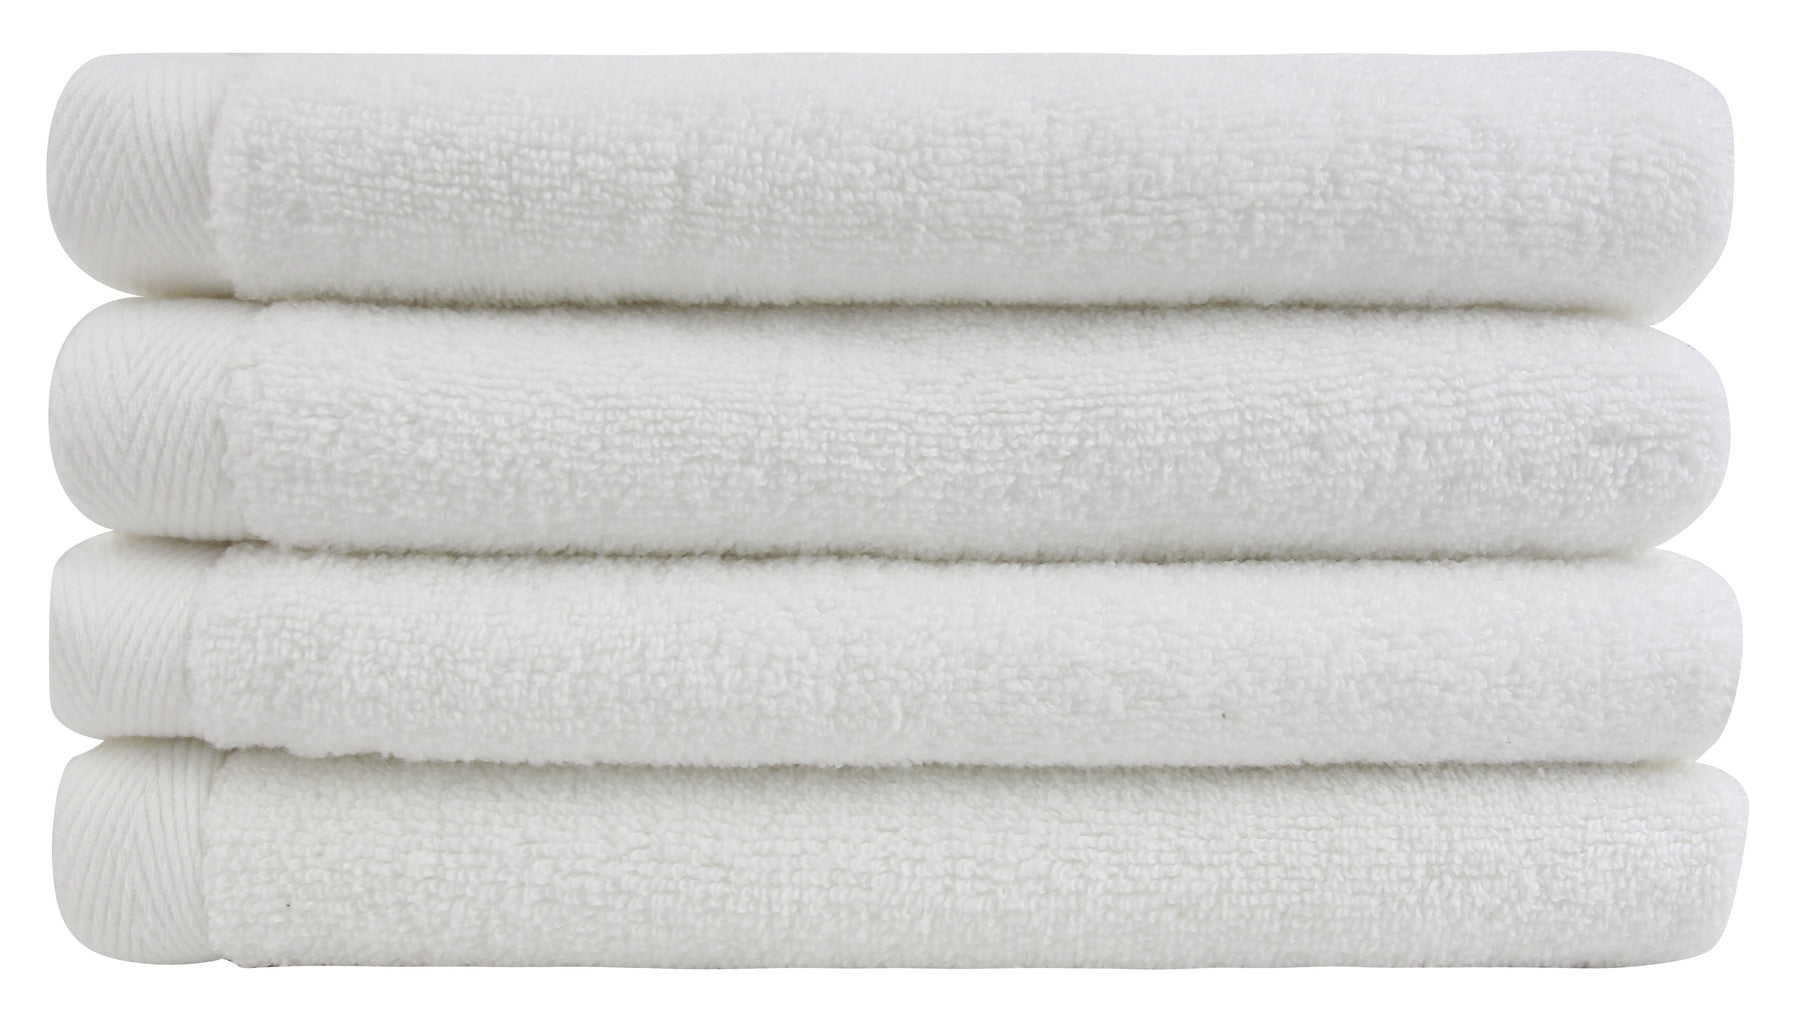 Flat Loop Hand Towels - 4 Pack, Porcelain (White) – The Everplush Company